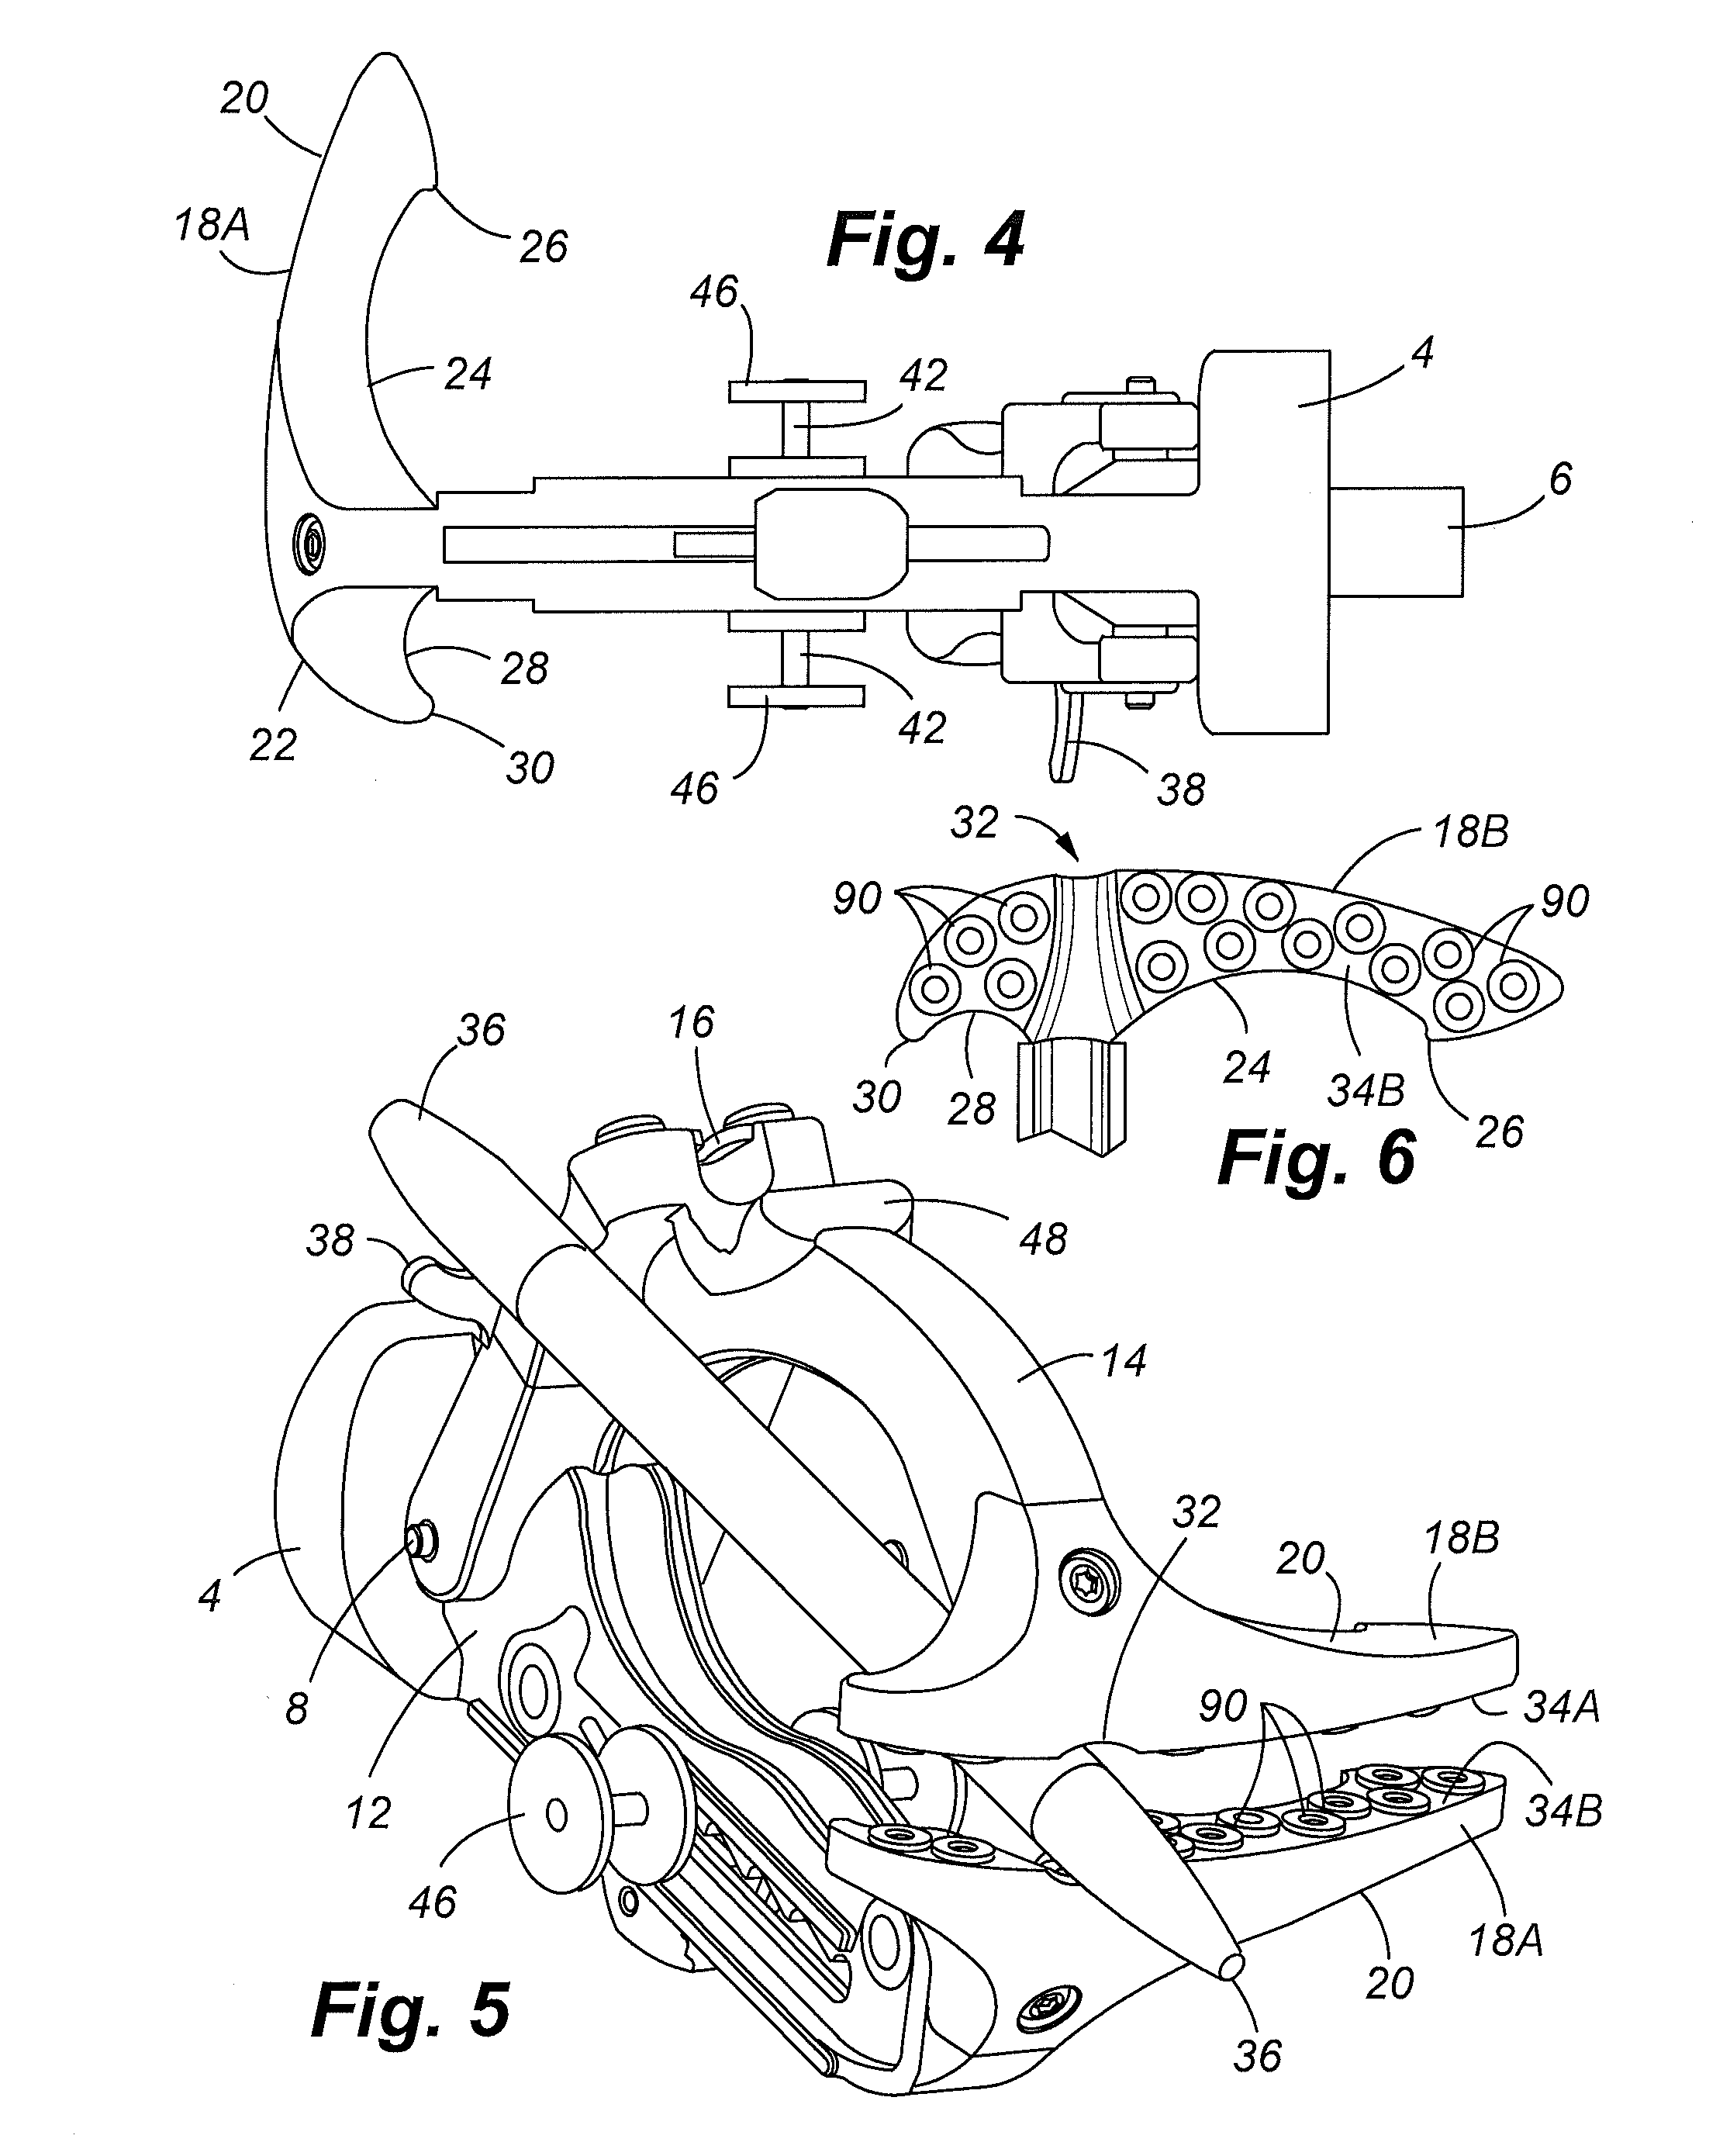 Prosthetic split hook terminal device with adjustable pinch force, functional grasping contours and illumination